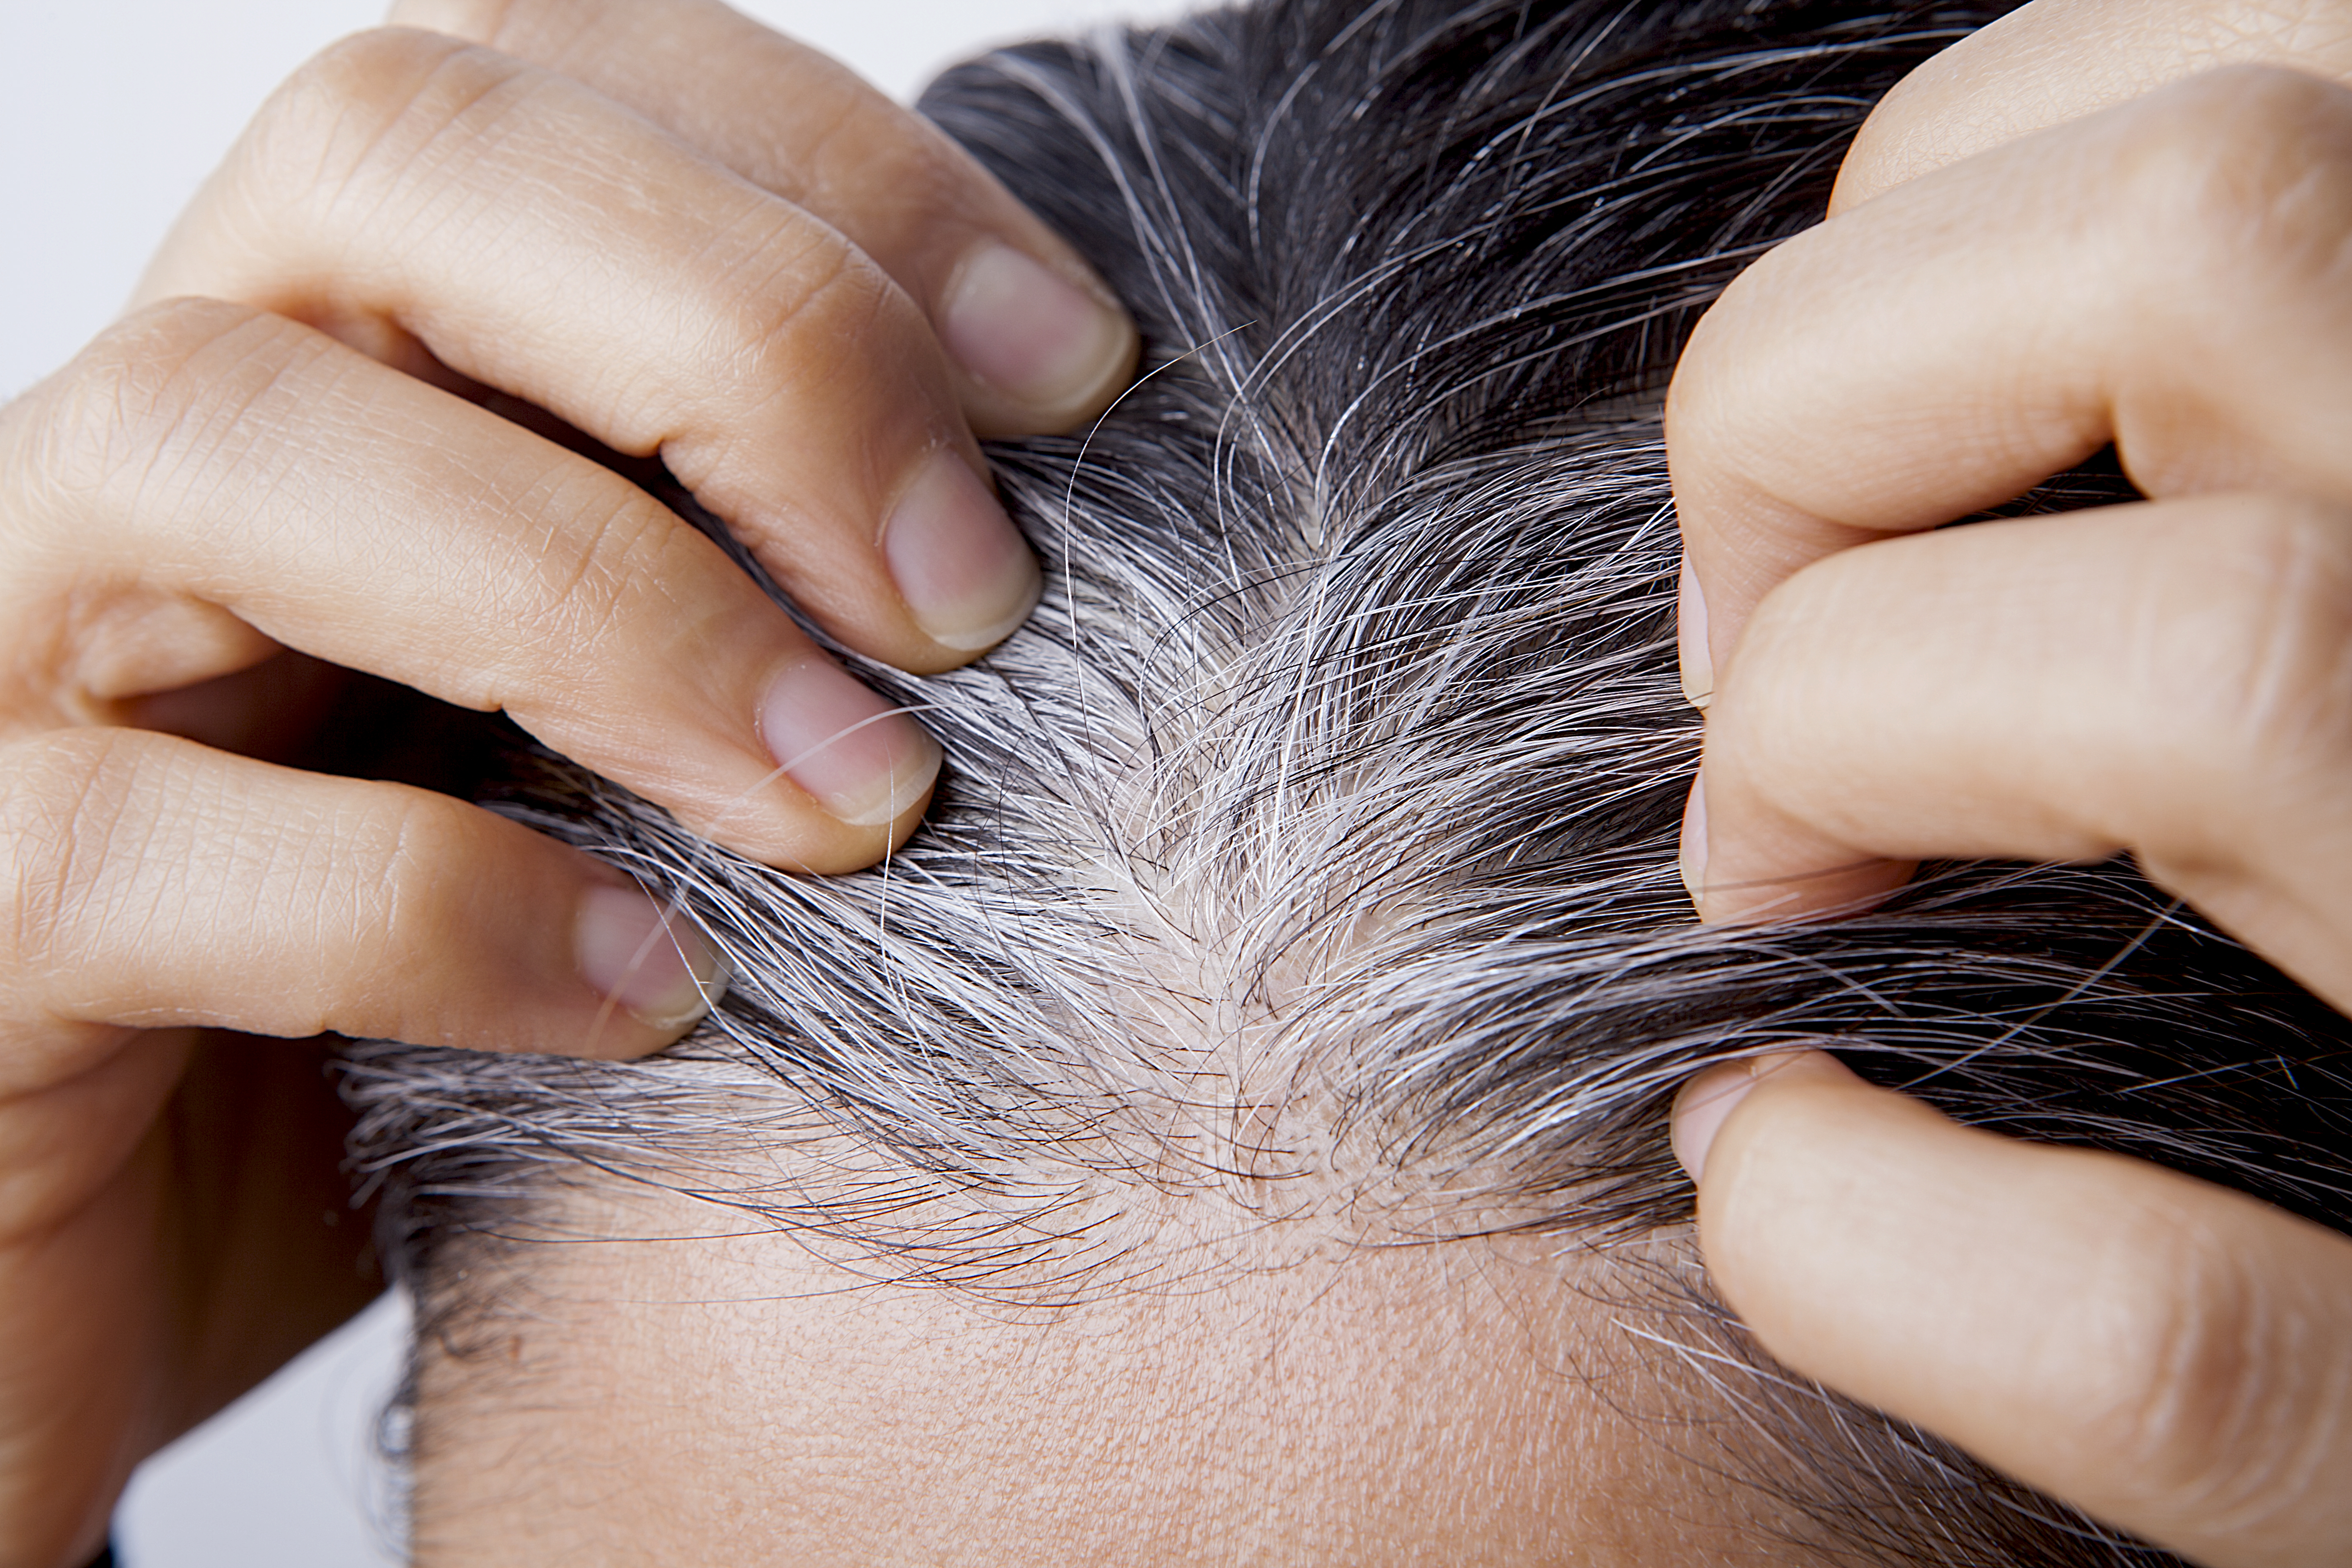 Do Blood Pressure Medications Cause Hair Loss? | livestrong